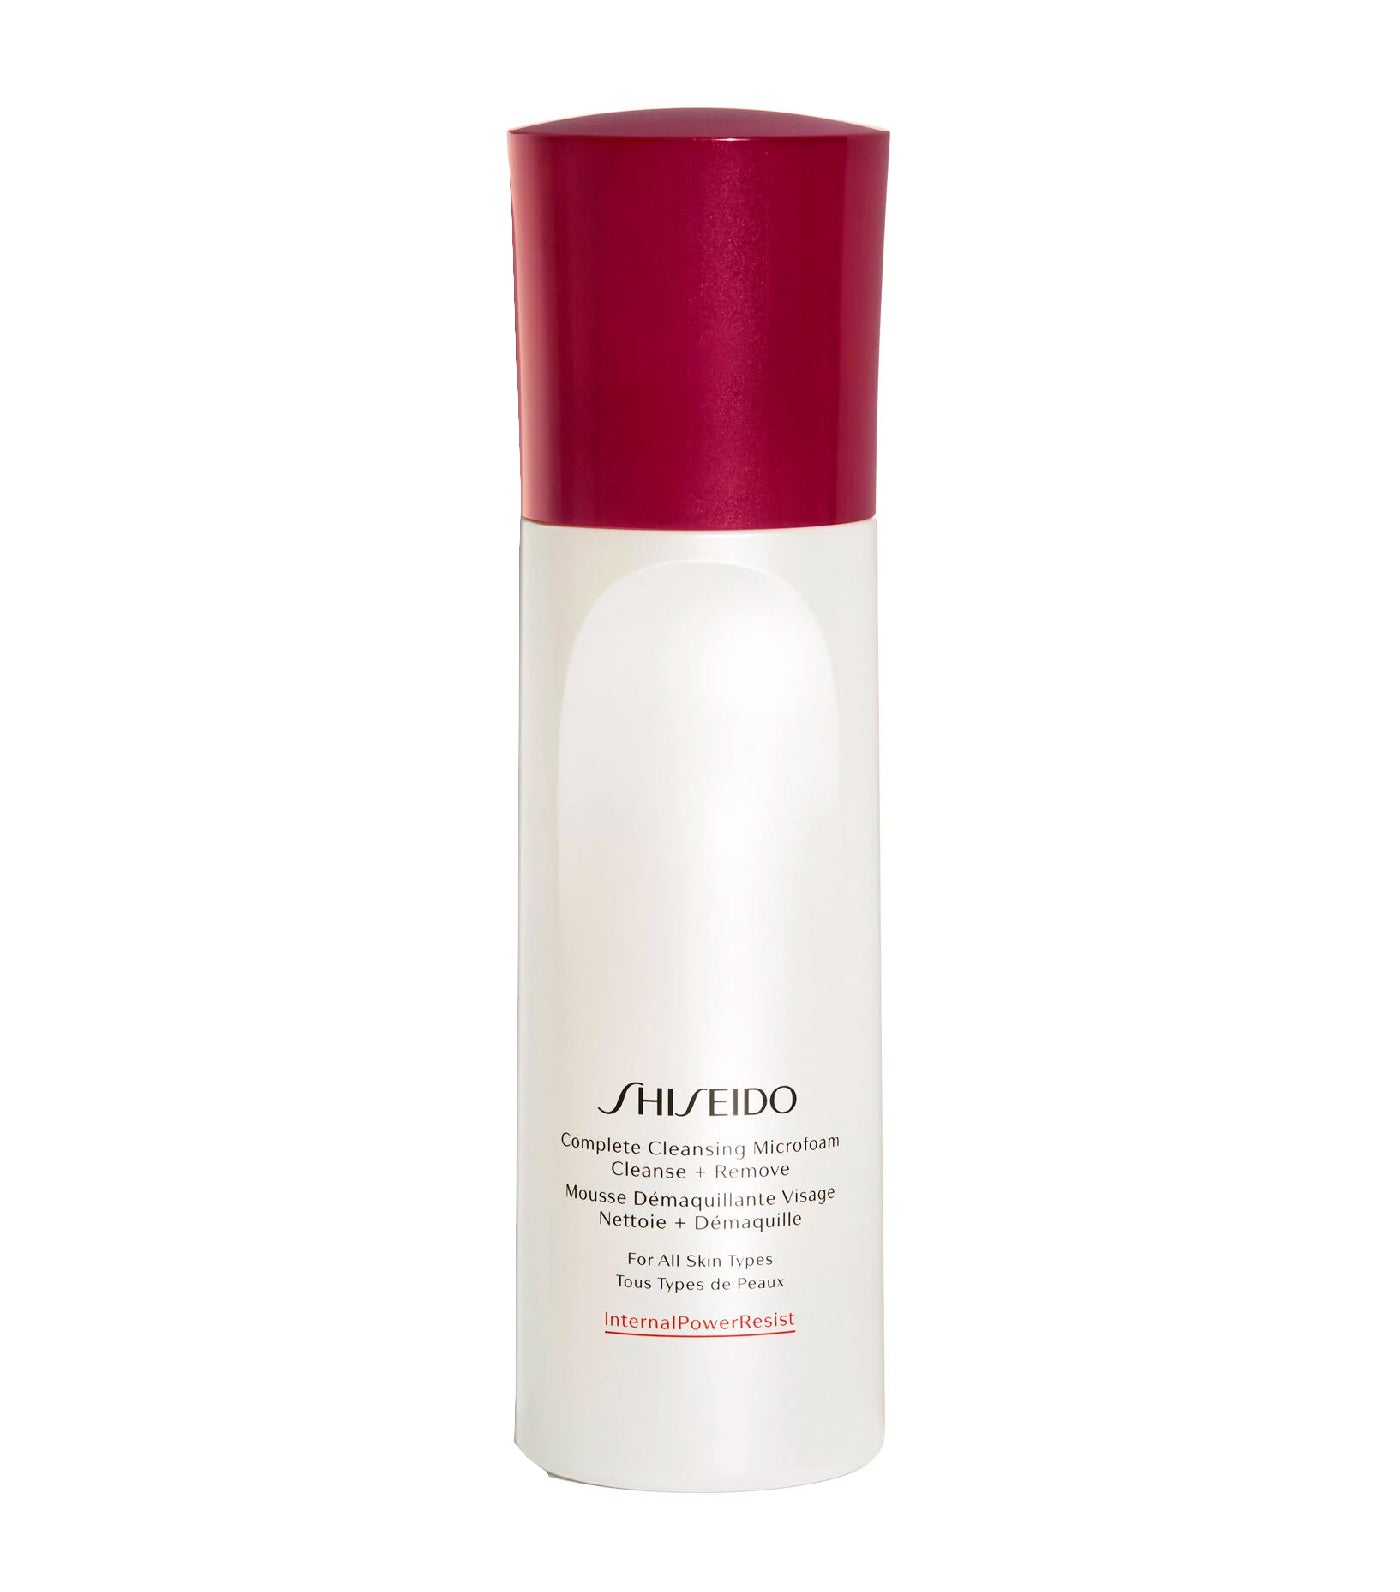 shiseido free complete cleansing microfoam